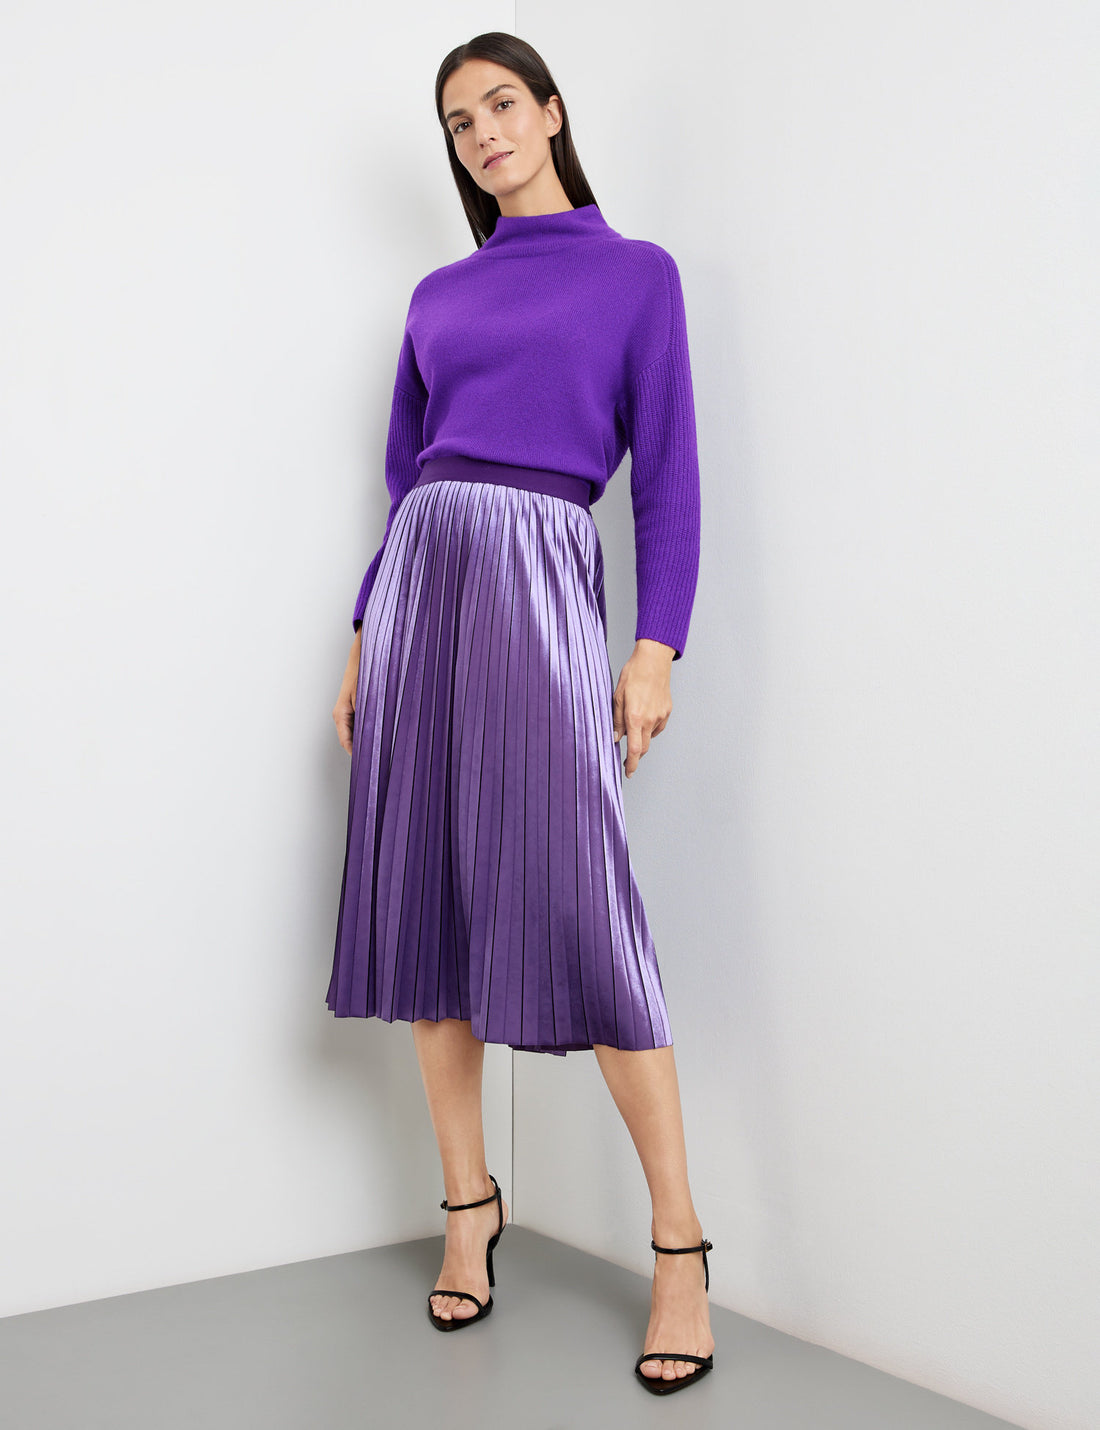 Pleated Skirt With A Subtle Shimmer And An Elasticated Waistband_210036-31531_30909_01